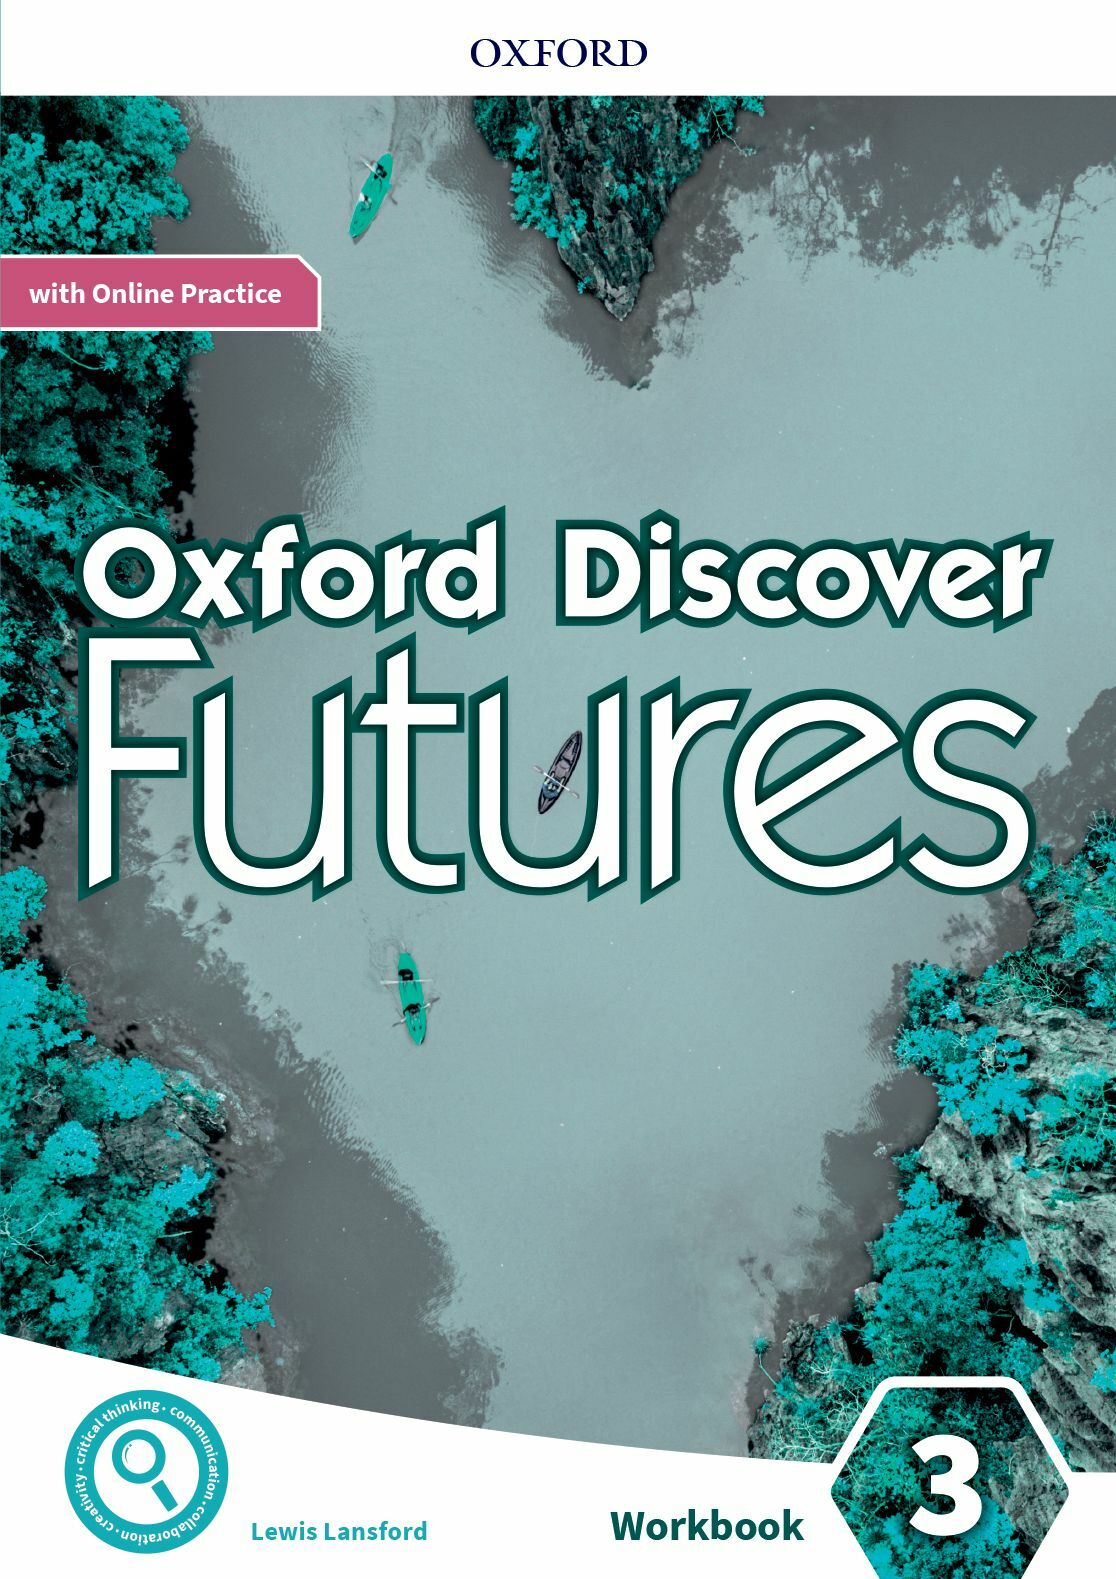 Oxford Discover Futures Level 3: Workbook with Online Practice (Paperback)